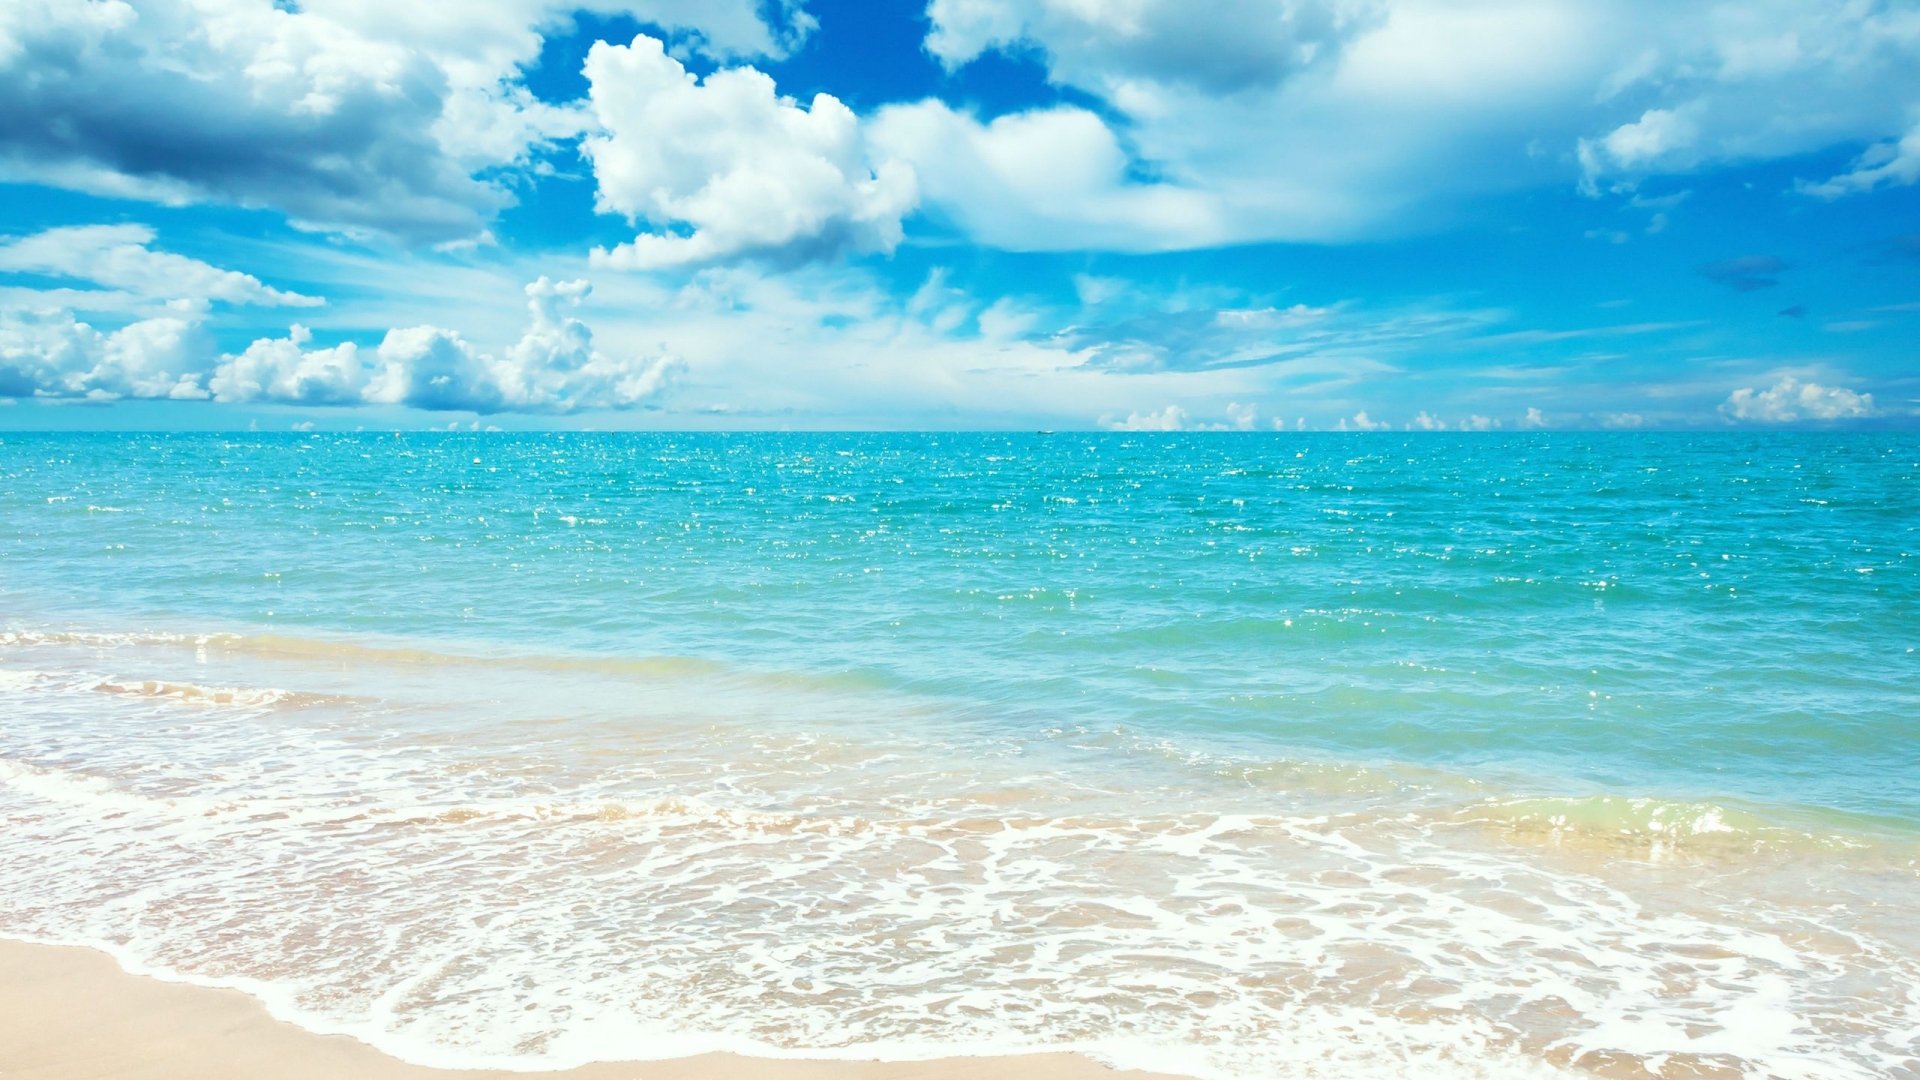 The Join Cloud And Sea Nice Best Scene Summer Season Hd Free Wallpapers Download